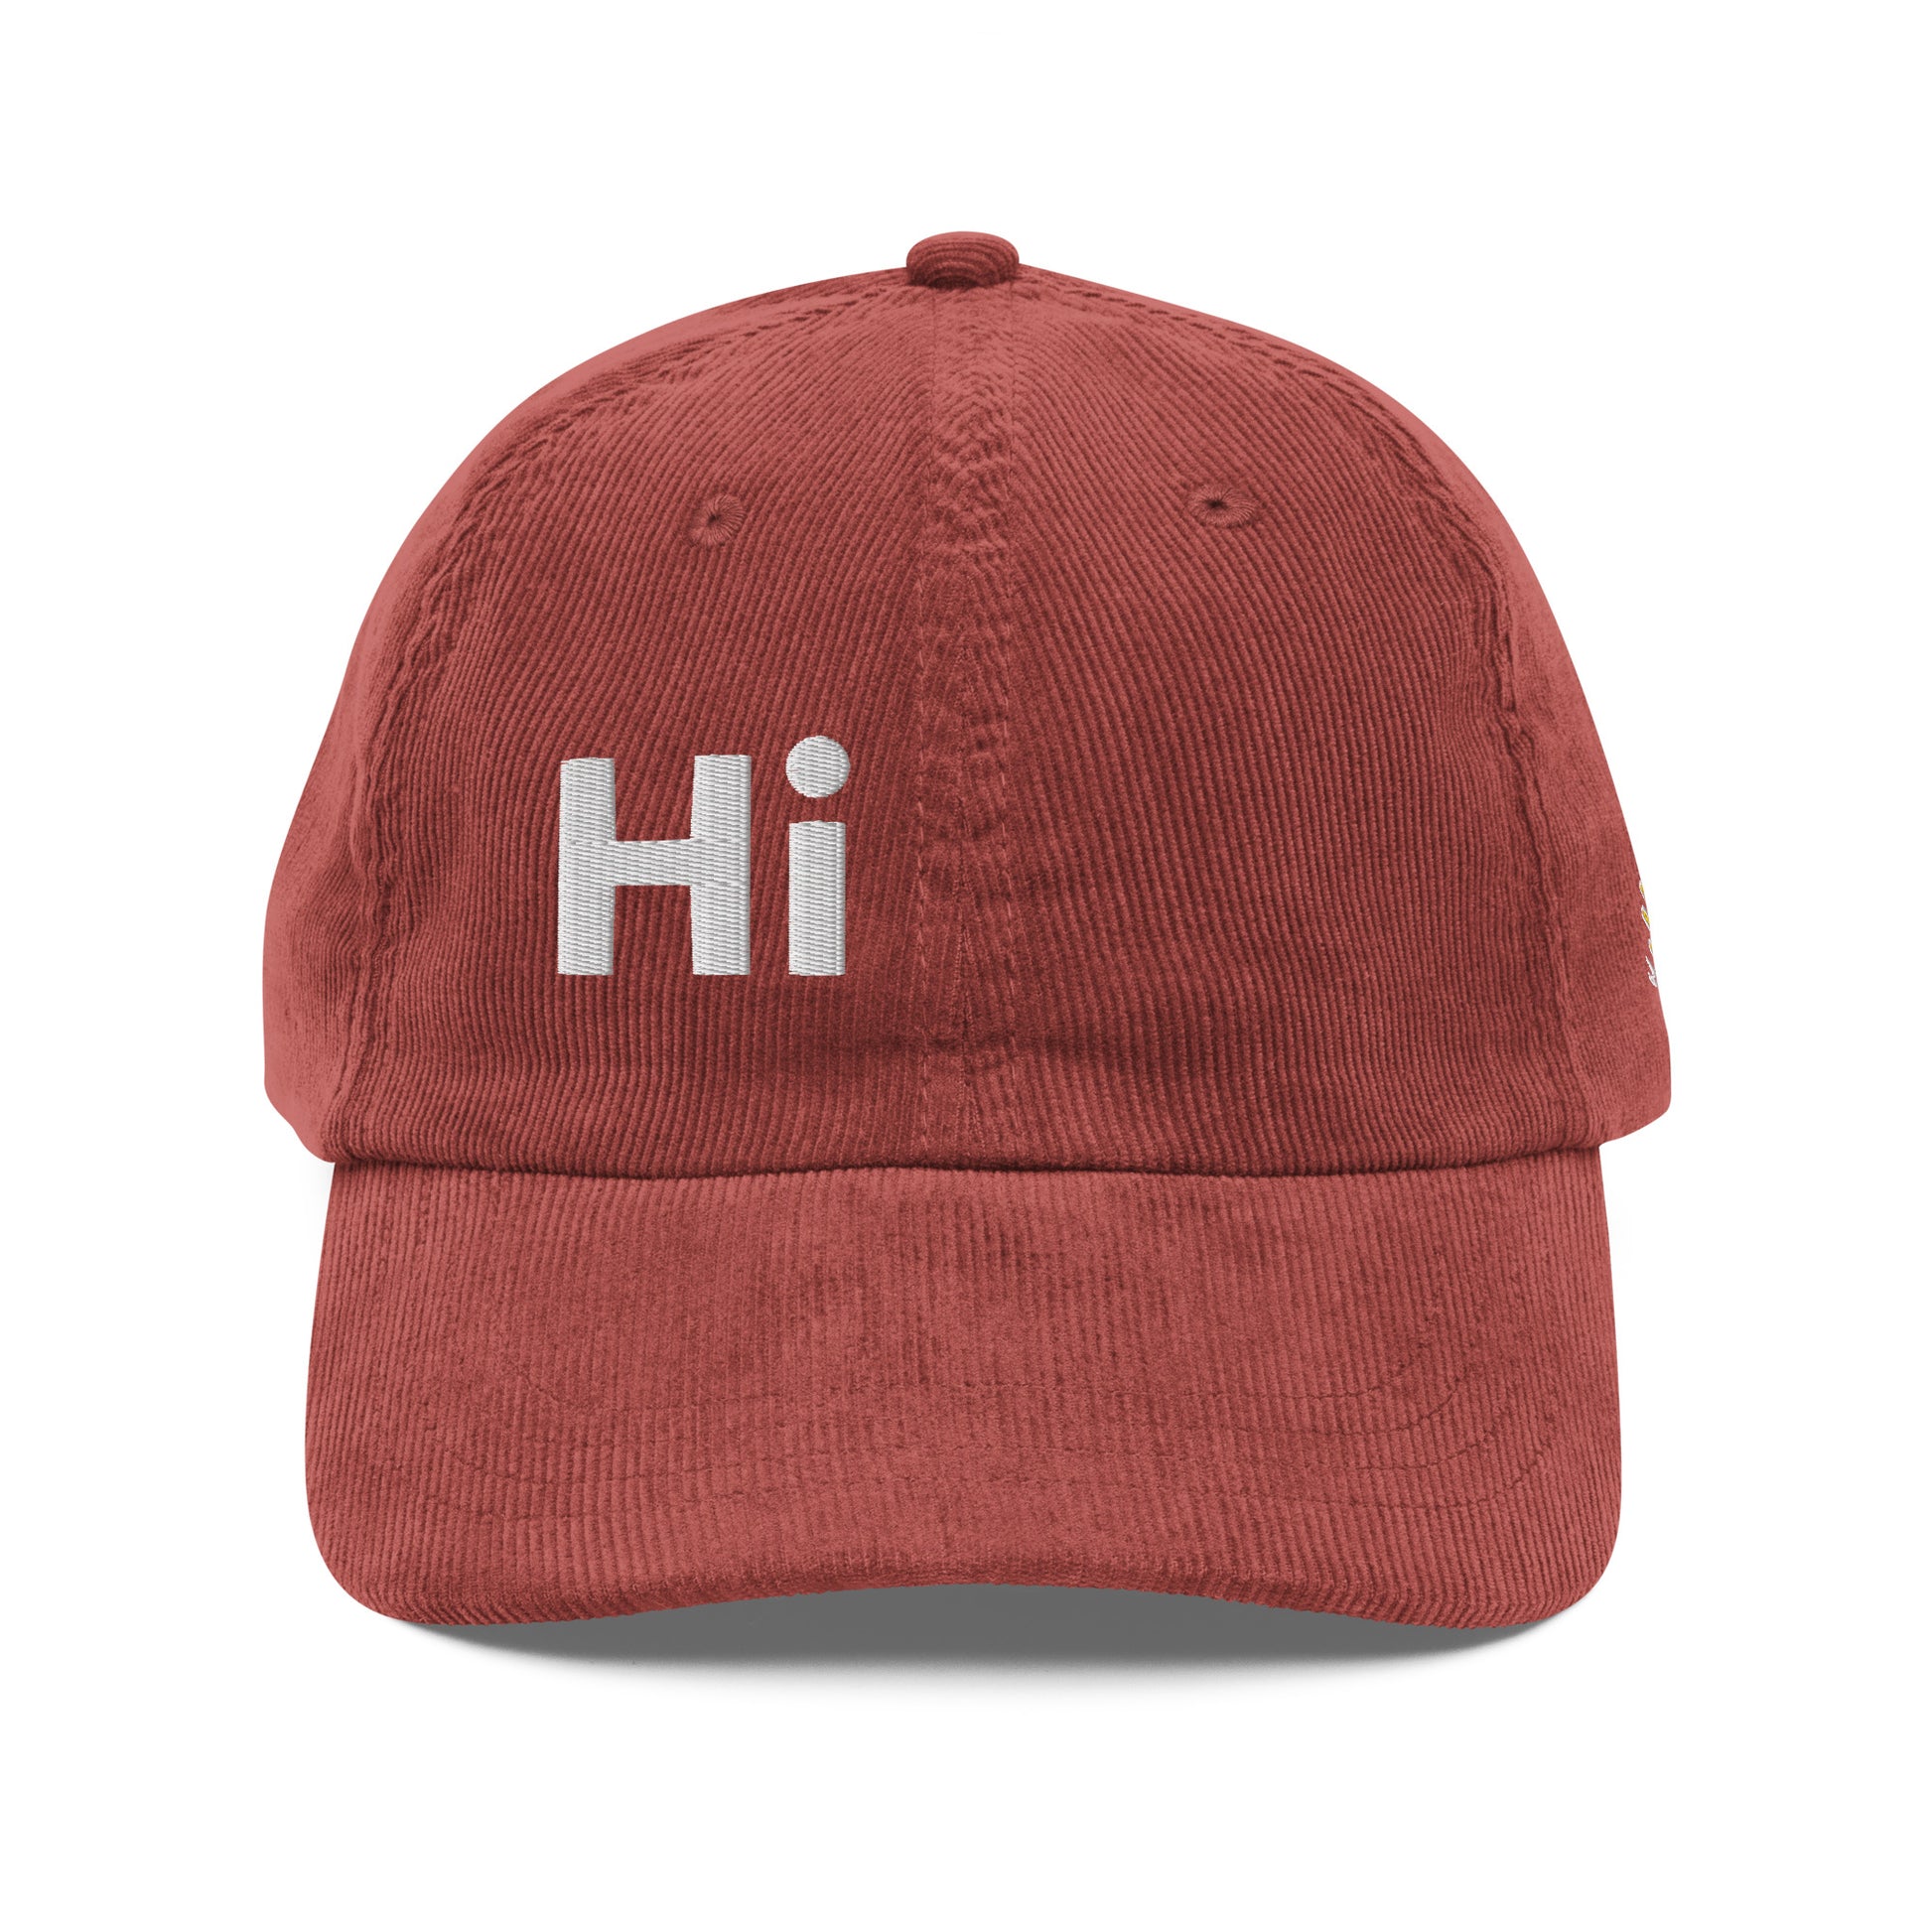 Hi Shalom Hebrew Corduroy Hat by Happy interactions in Maroon